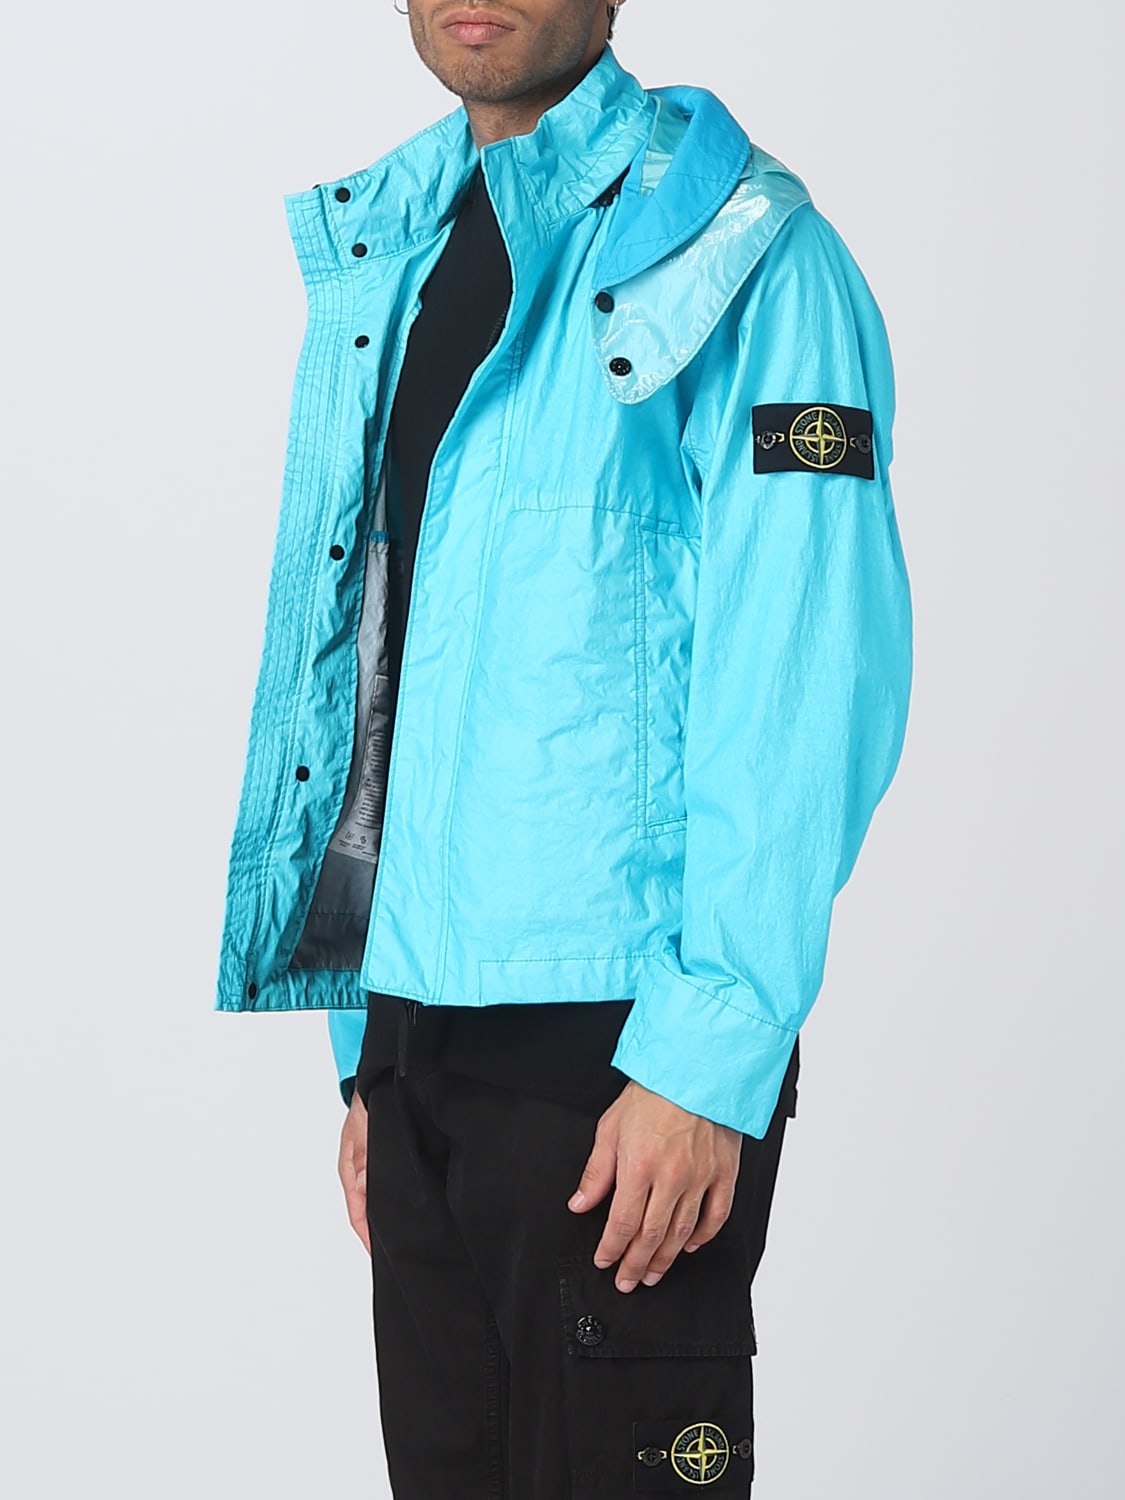 Stone Island Outlet: jacket for man - Gnawed Blue | Stone Island